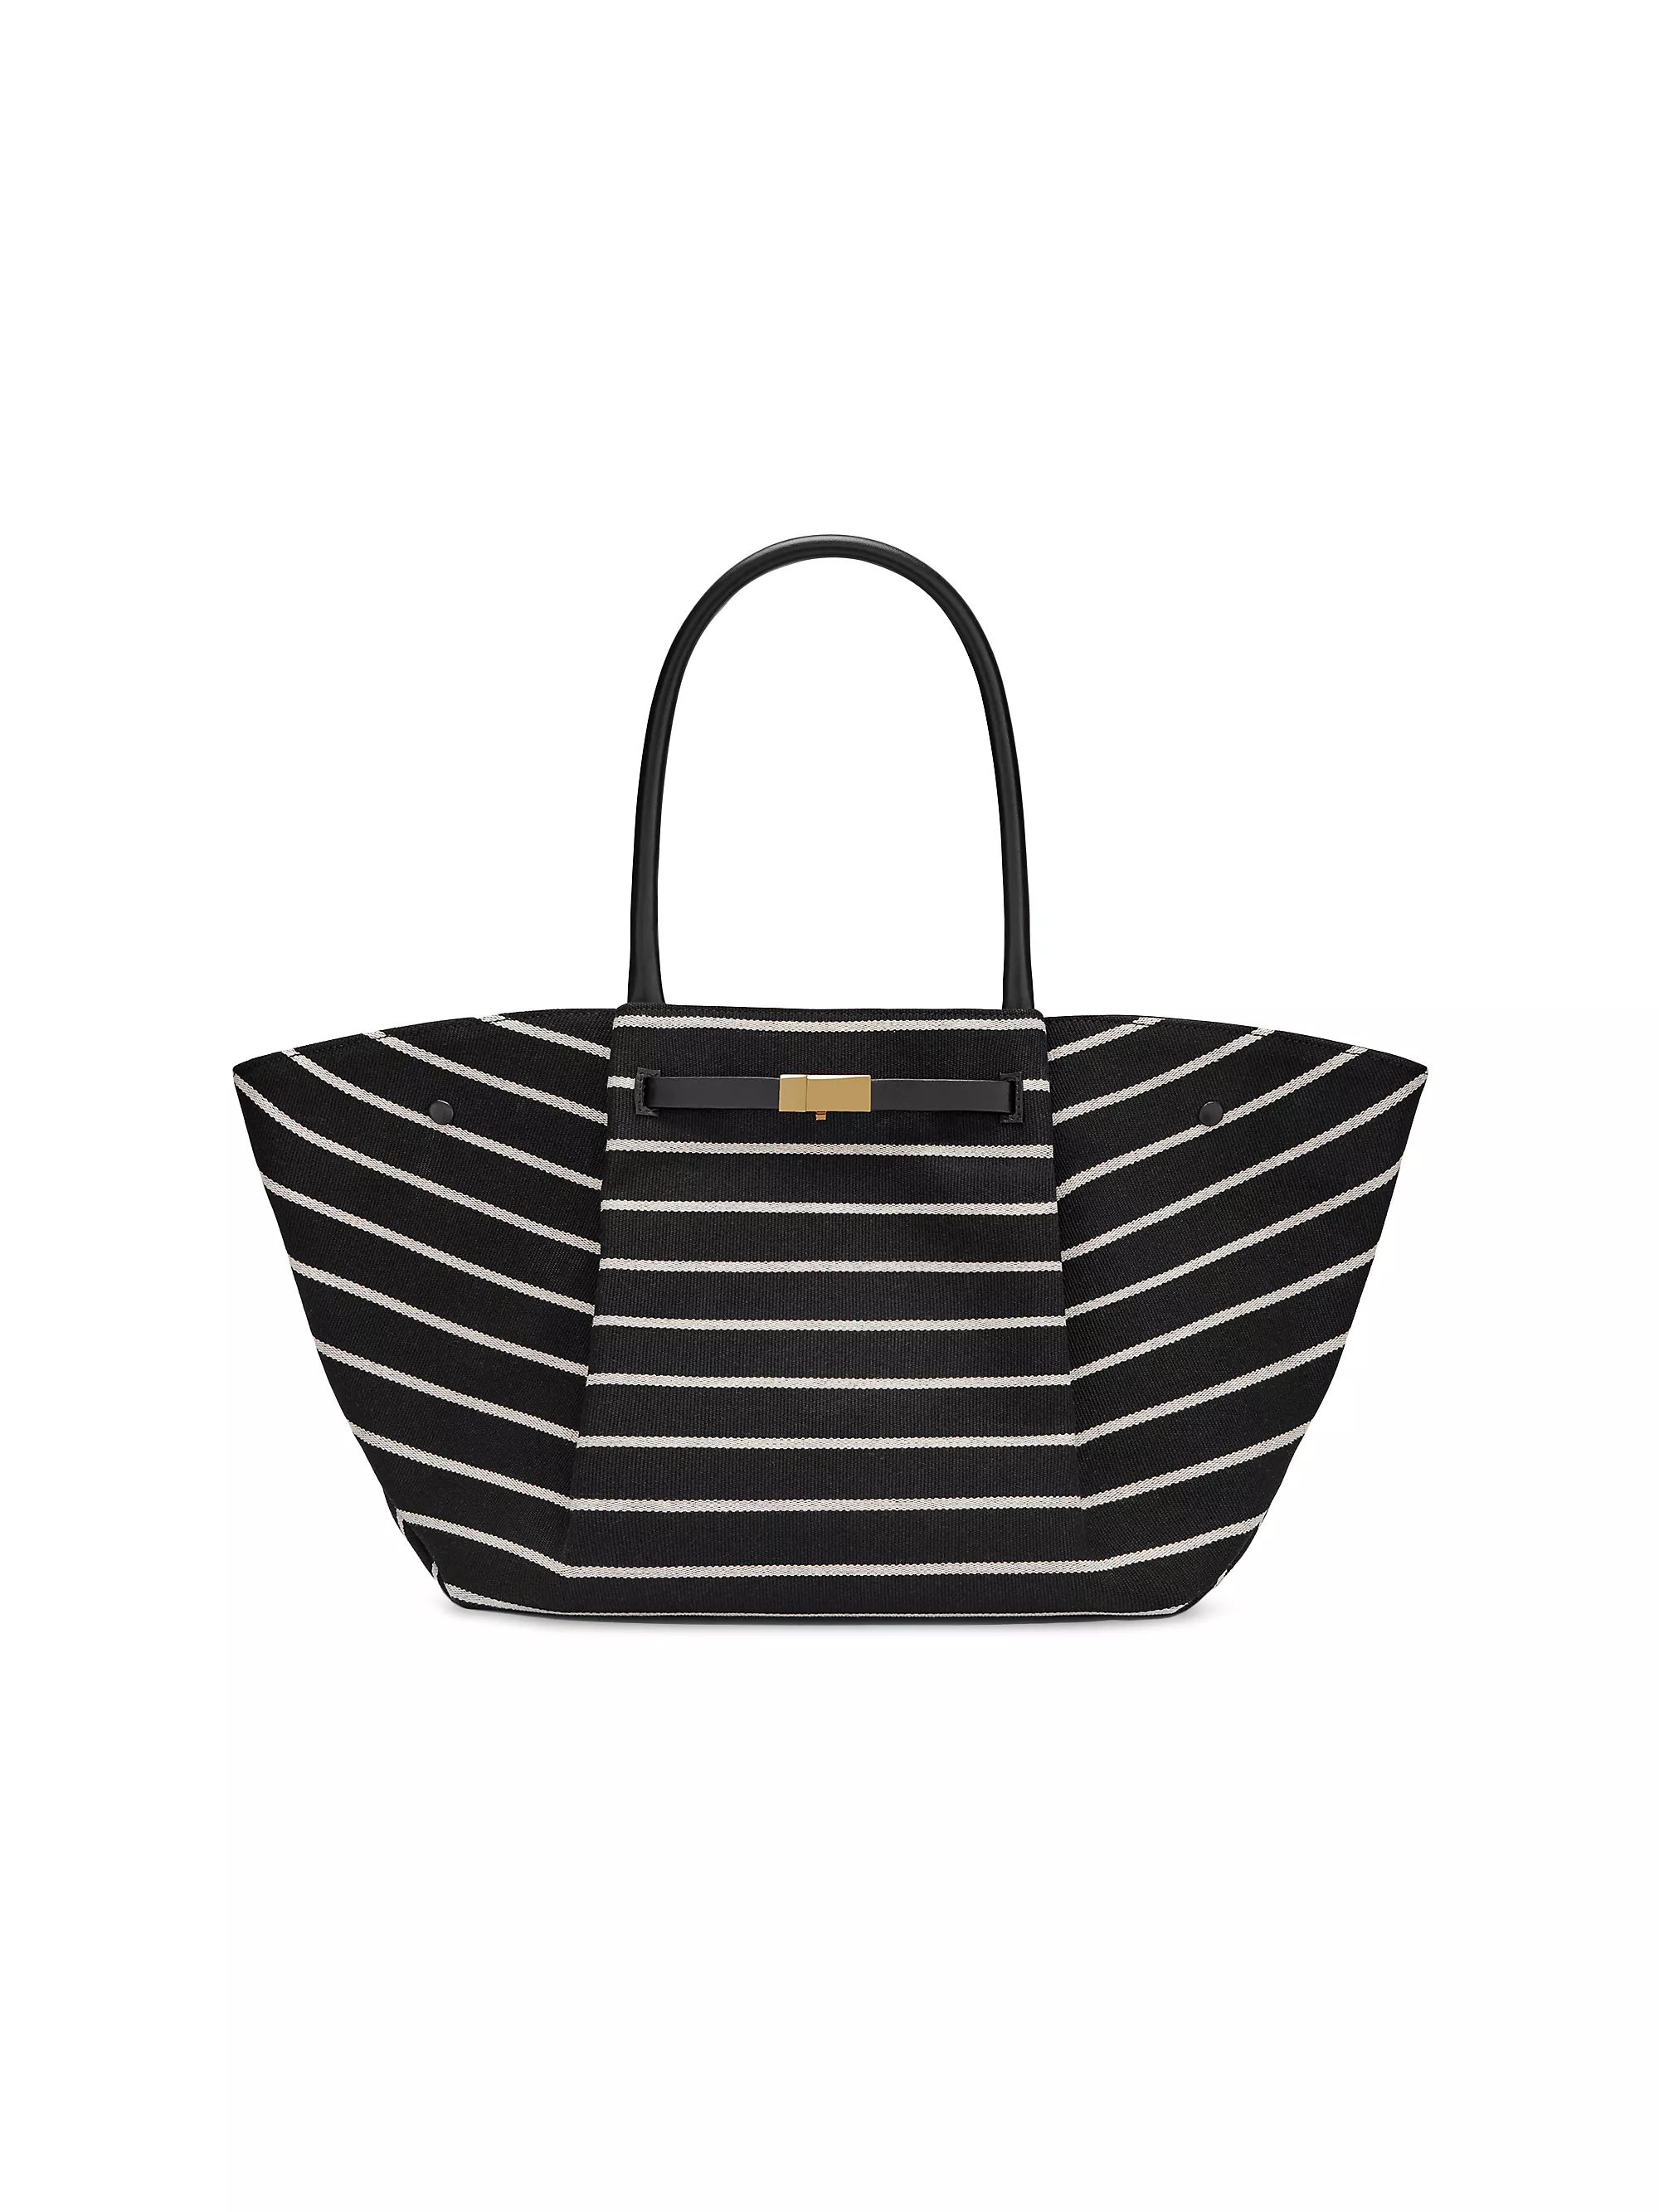 Shop DeMellier New York Striped Canvas &amp; Leather Tote Bag | Saks Fifth Avenue | Saks Fifth Avenue